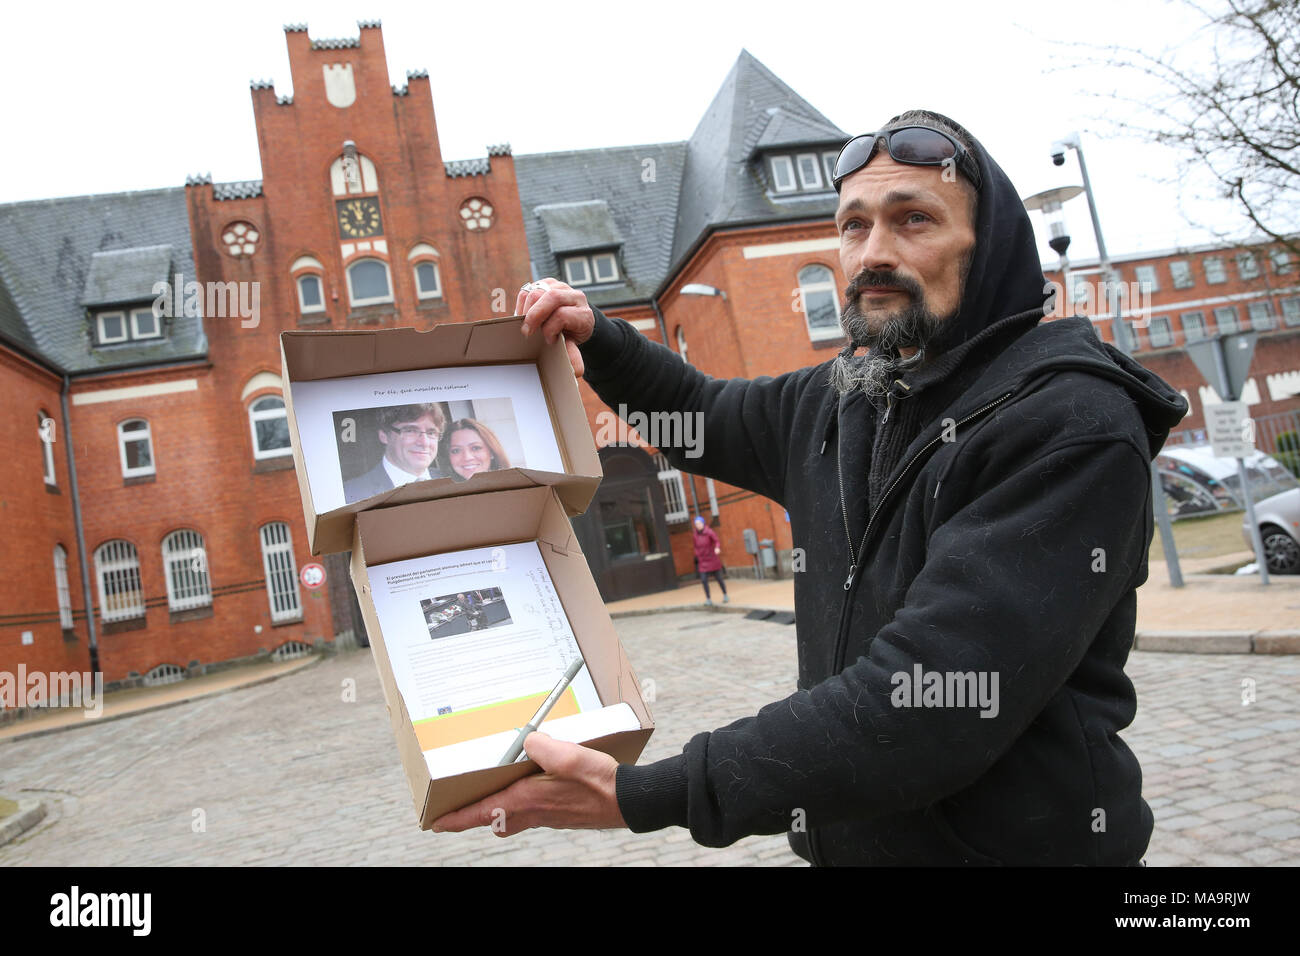 Neumuenster, Germany, 31 March 2018.Activist Gerdson Hengist standing with a 'care package' in front of the correctional facility in Neumuenster, where Catalonia's former president Carles Puigdemont is currently in custody since 25 March. The attempt to deliver the package, containing newspaper articles and solidarity messages, failed. Photo: Bodo Marks/dpa Stock Photo